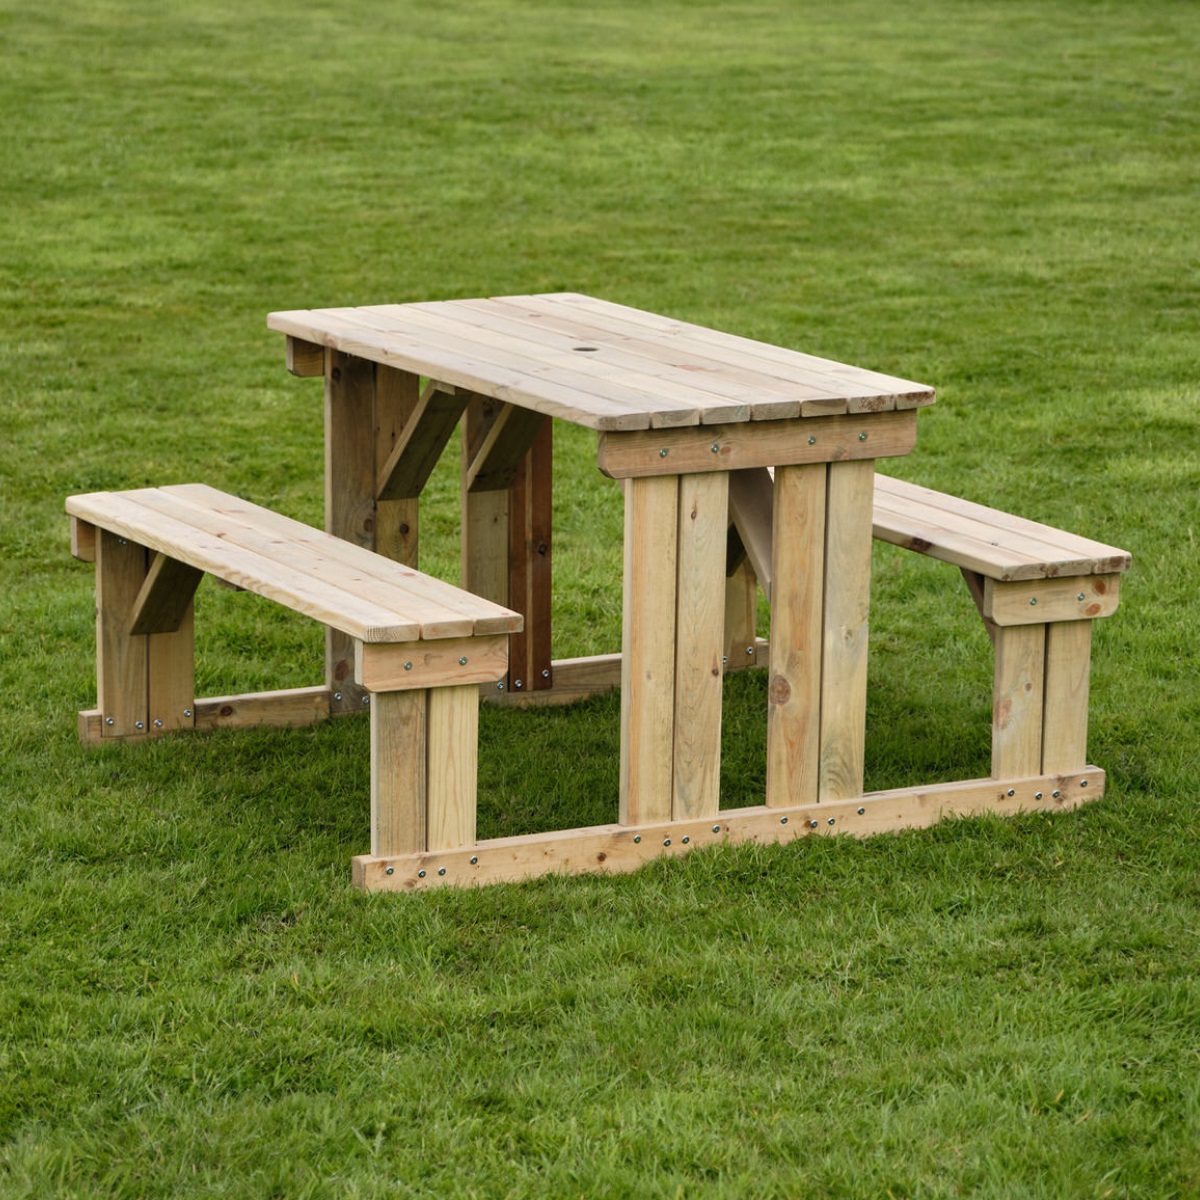 Commercial wooden picnic table 6 seater